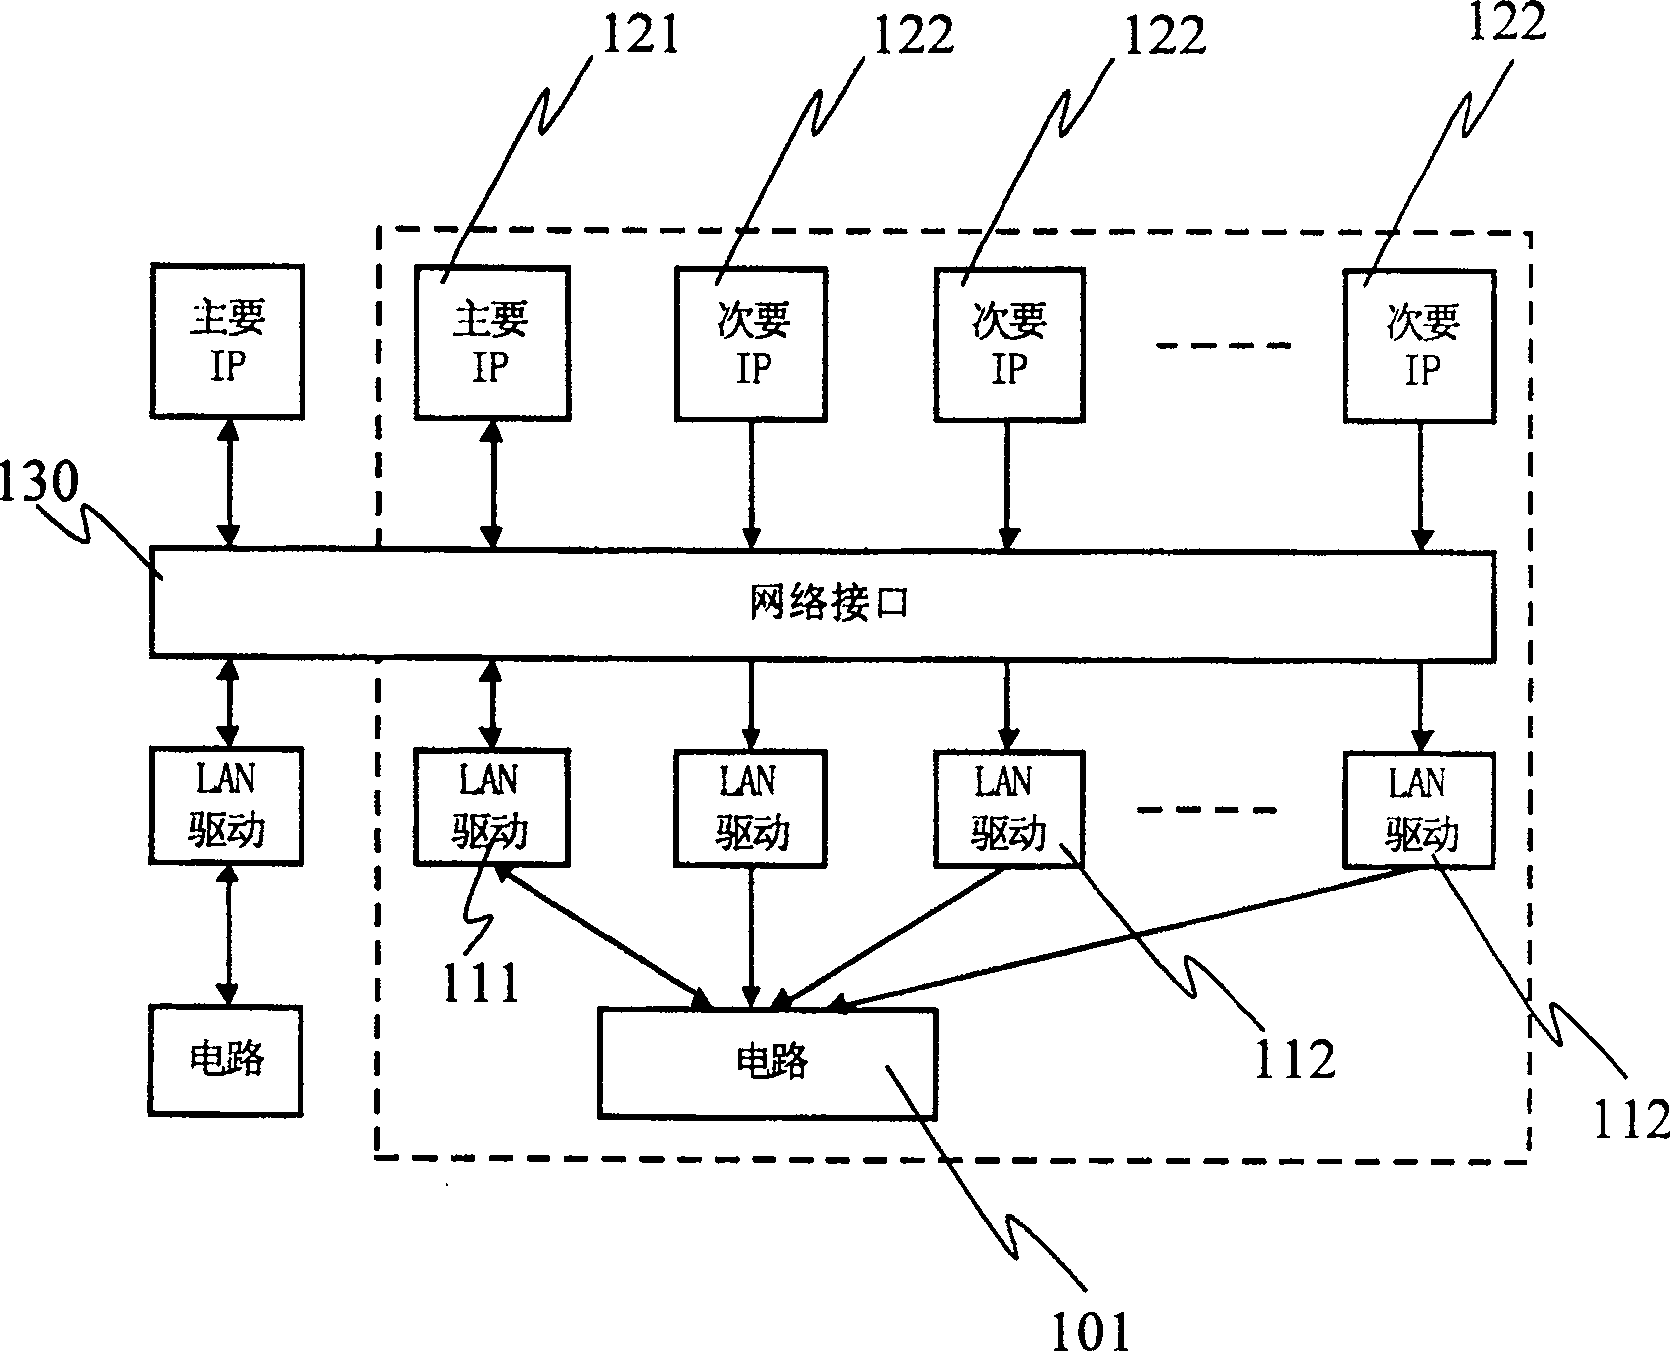 Method and device for providing multiple different net section IP address by one circuit